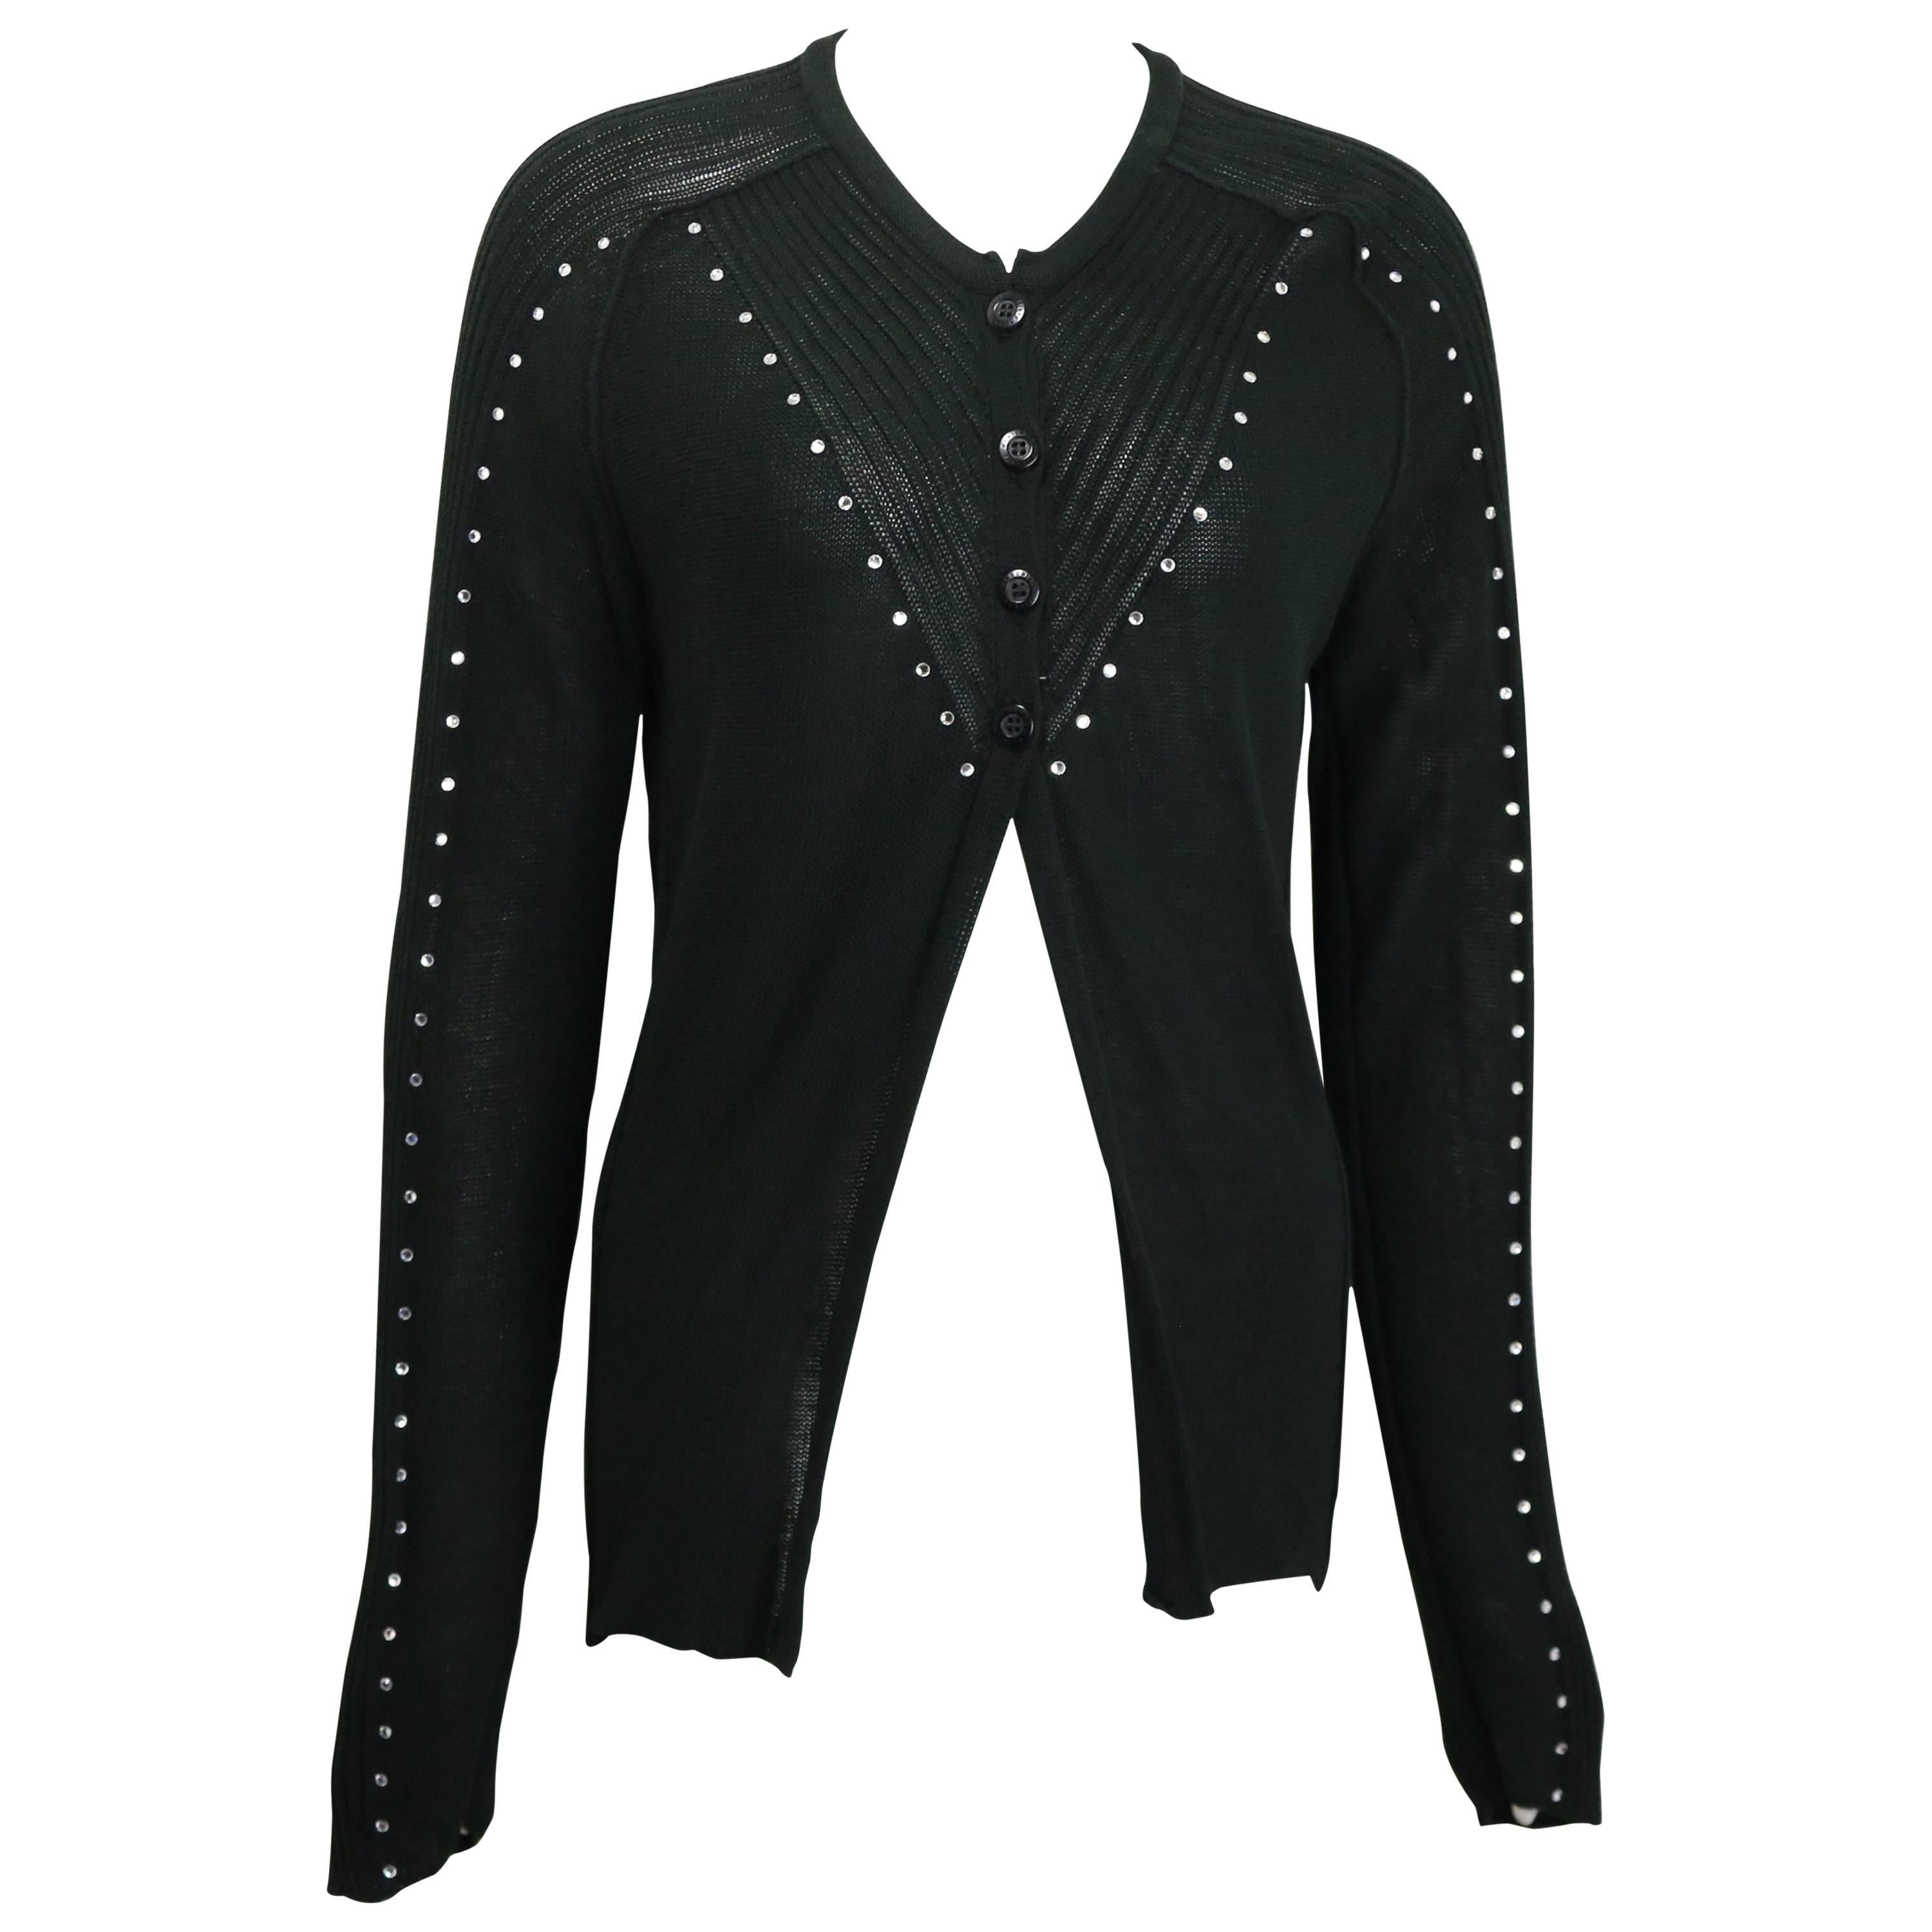 Sonia Rykiel Black Cotton Knitted Long Sleeves Cardigan with Rhinestones  For Sale